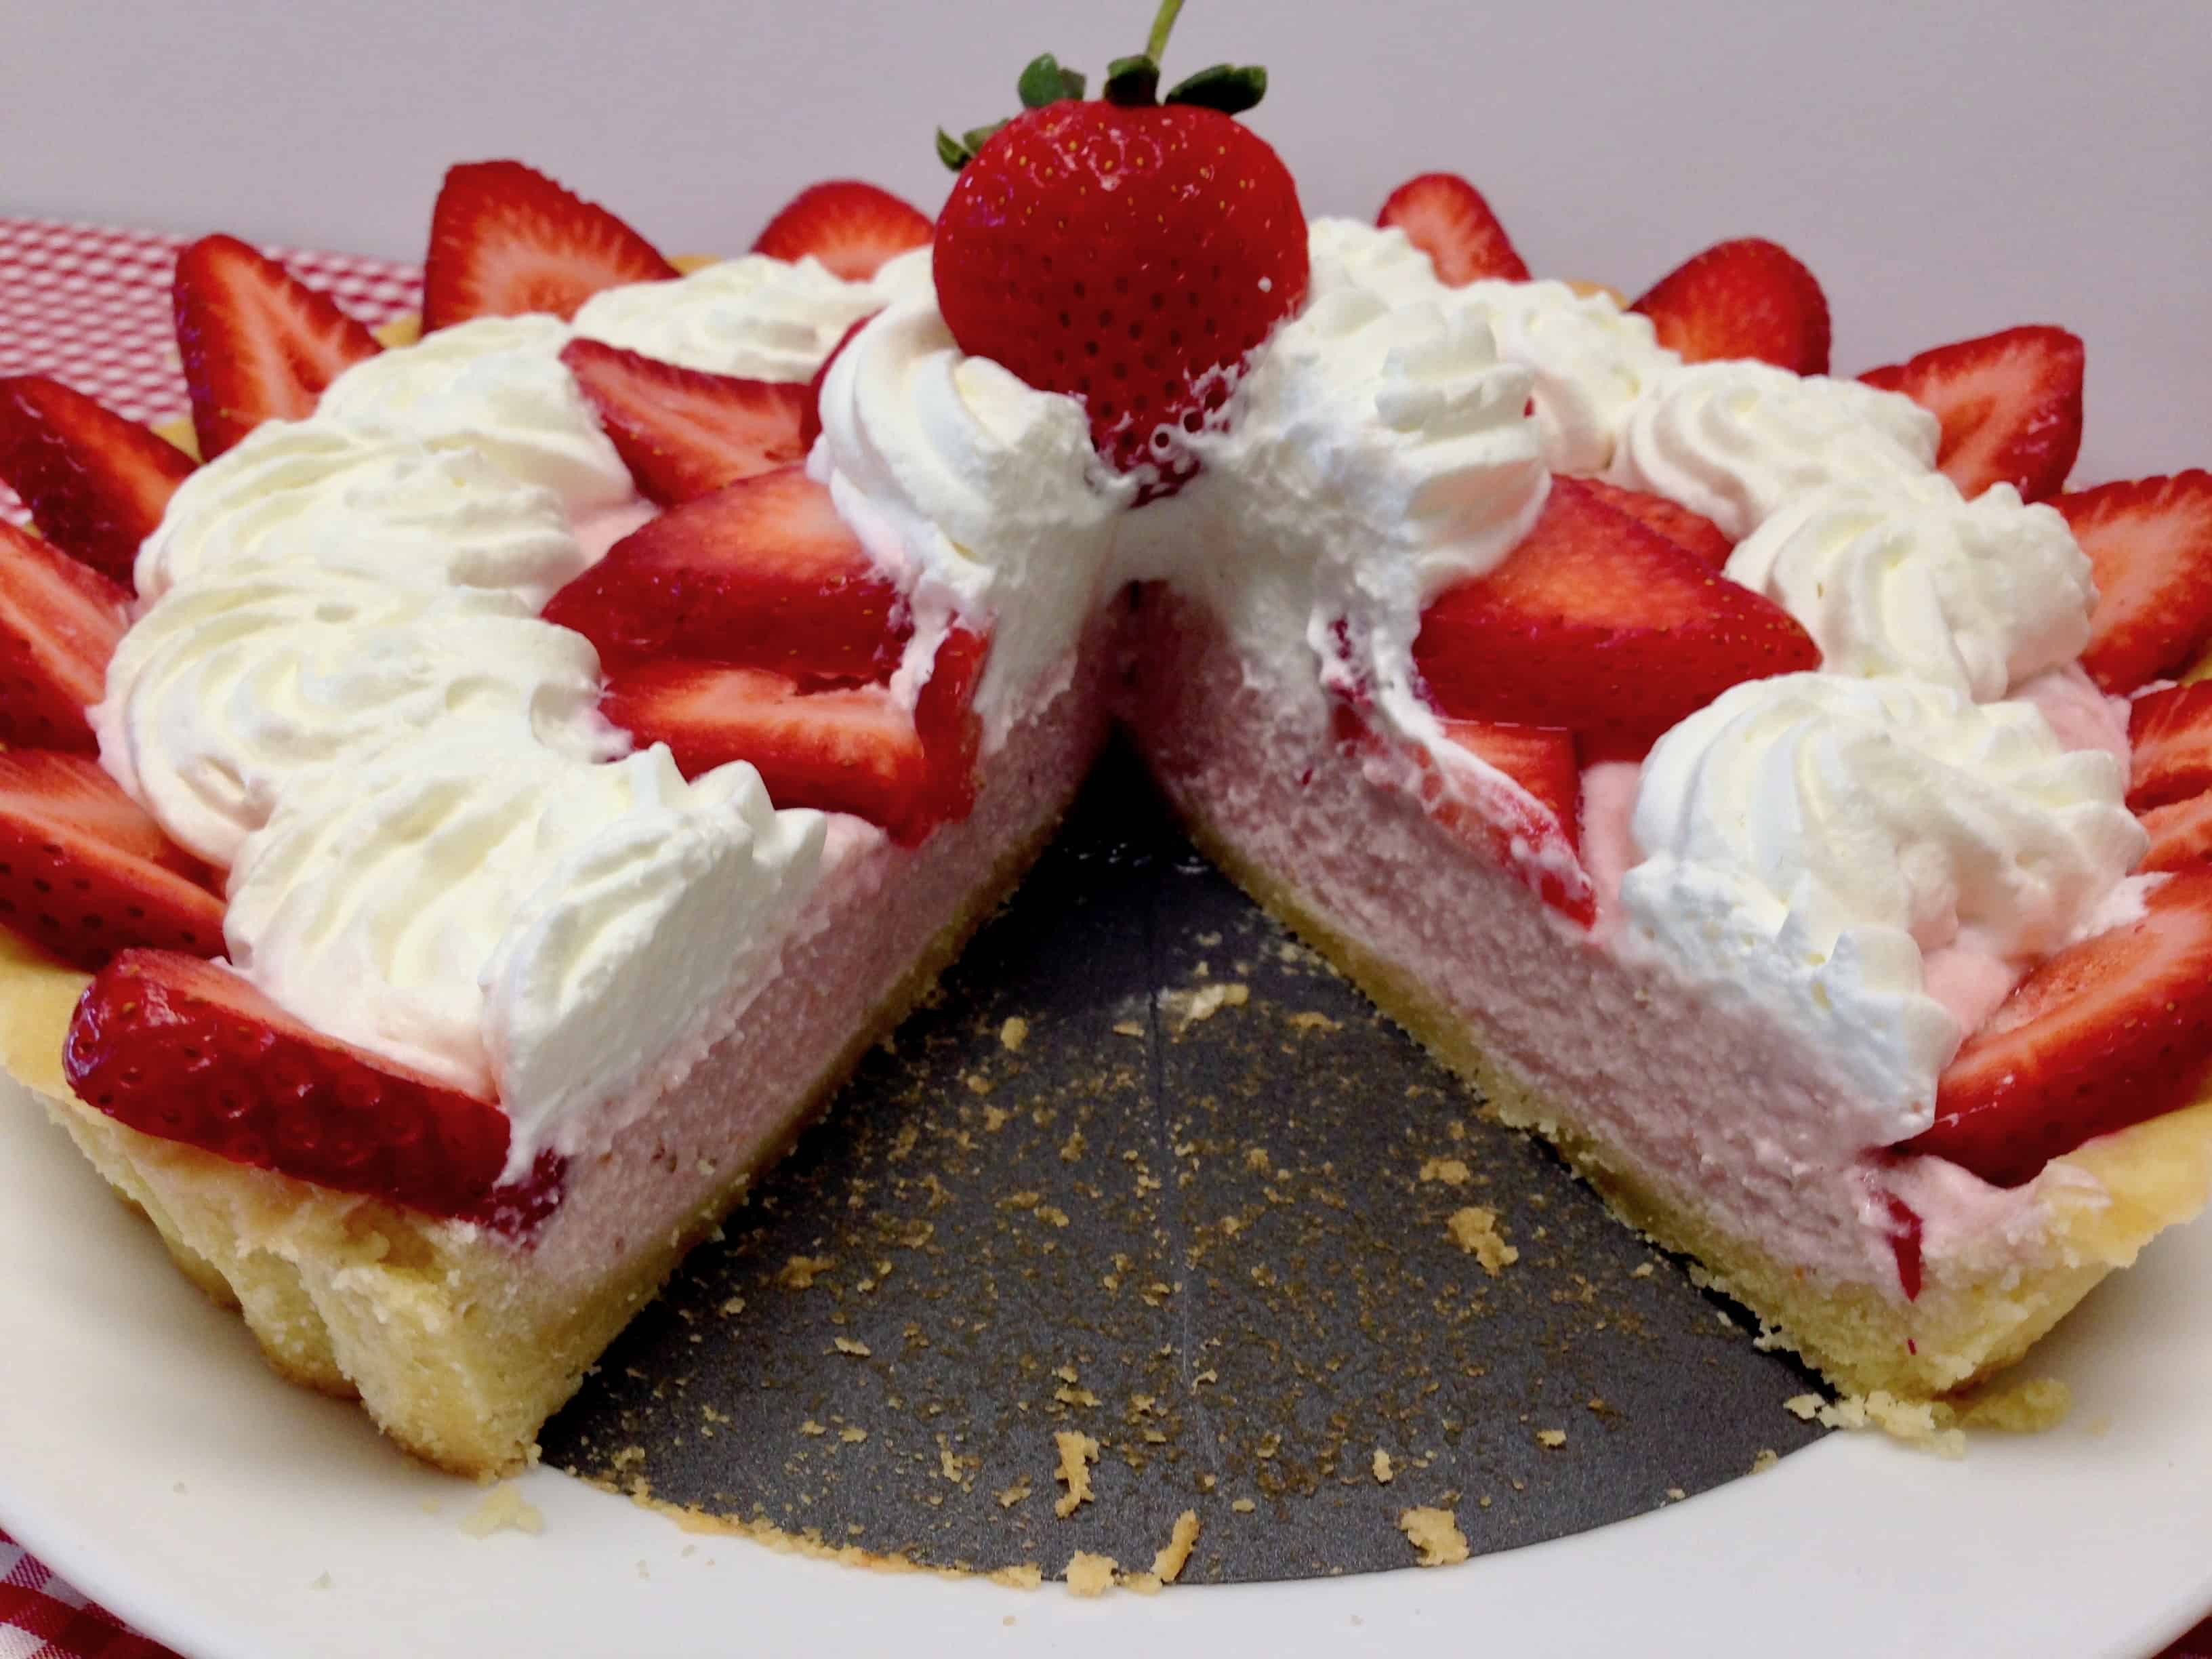 strawberry cream tart with whip cream and strawberries on top and slice missing